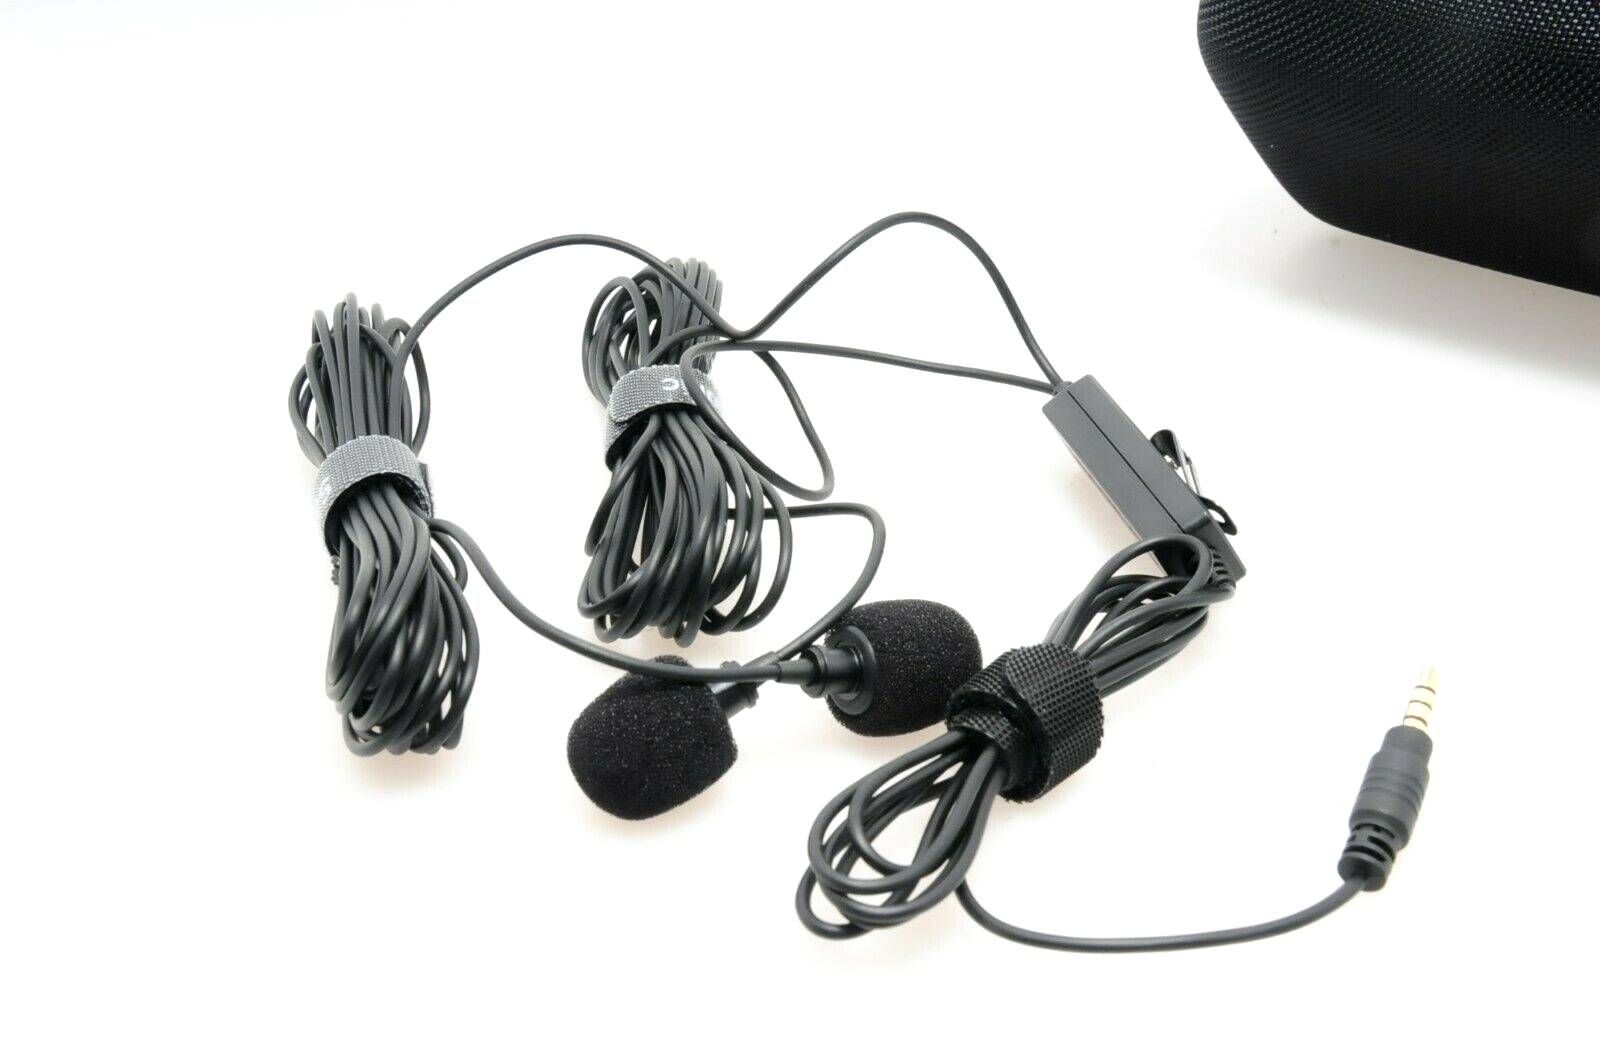 Used Saramonic Lavalier Microphone for DSLR cameras (Boxed SH36704)